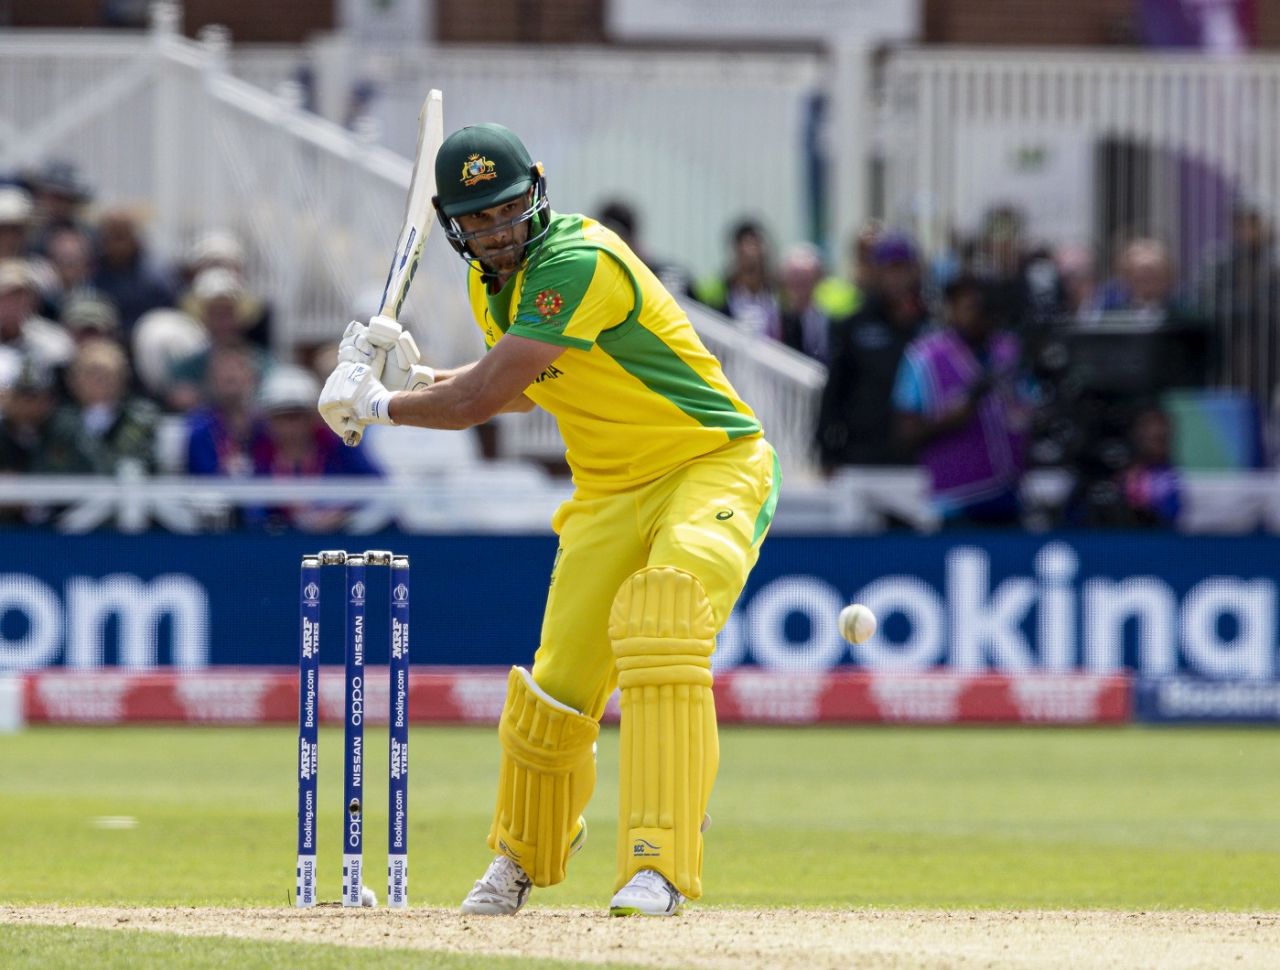 Nathan Coulter-Nile hits a boundary, Australia v West Indies, World Cup 2019, Trent Bridge, June 6, 2019